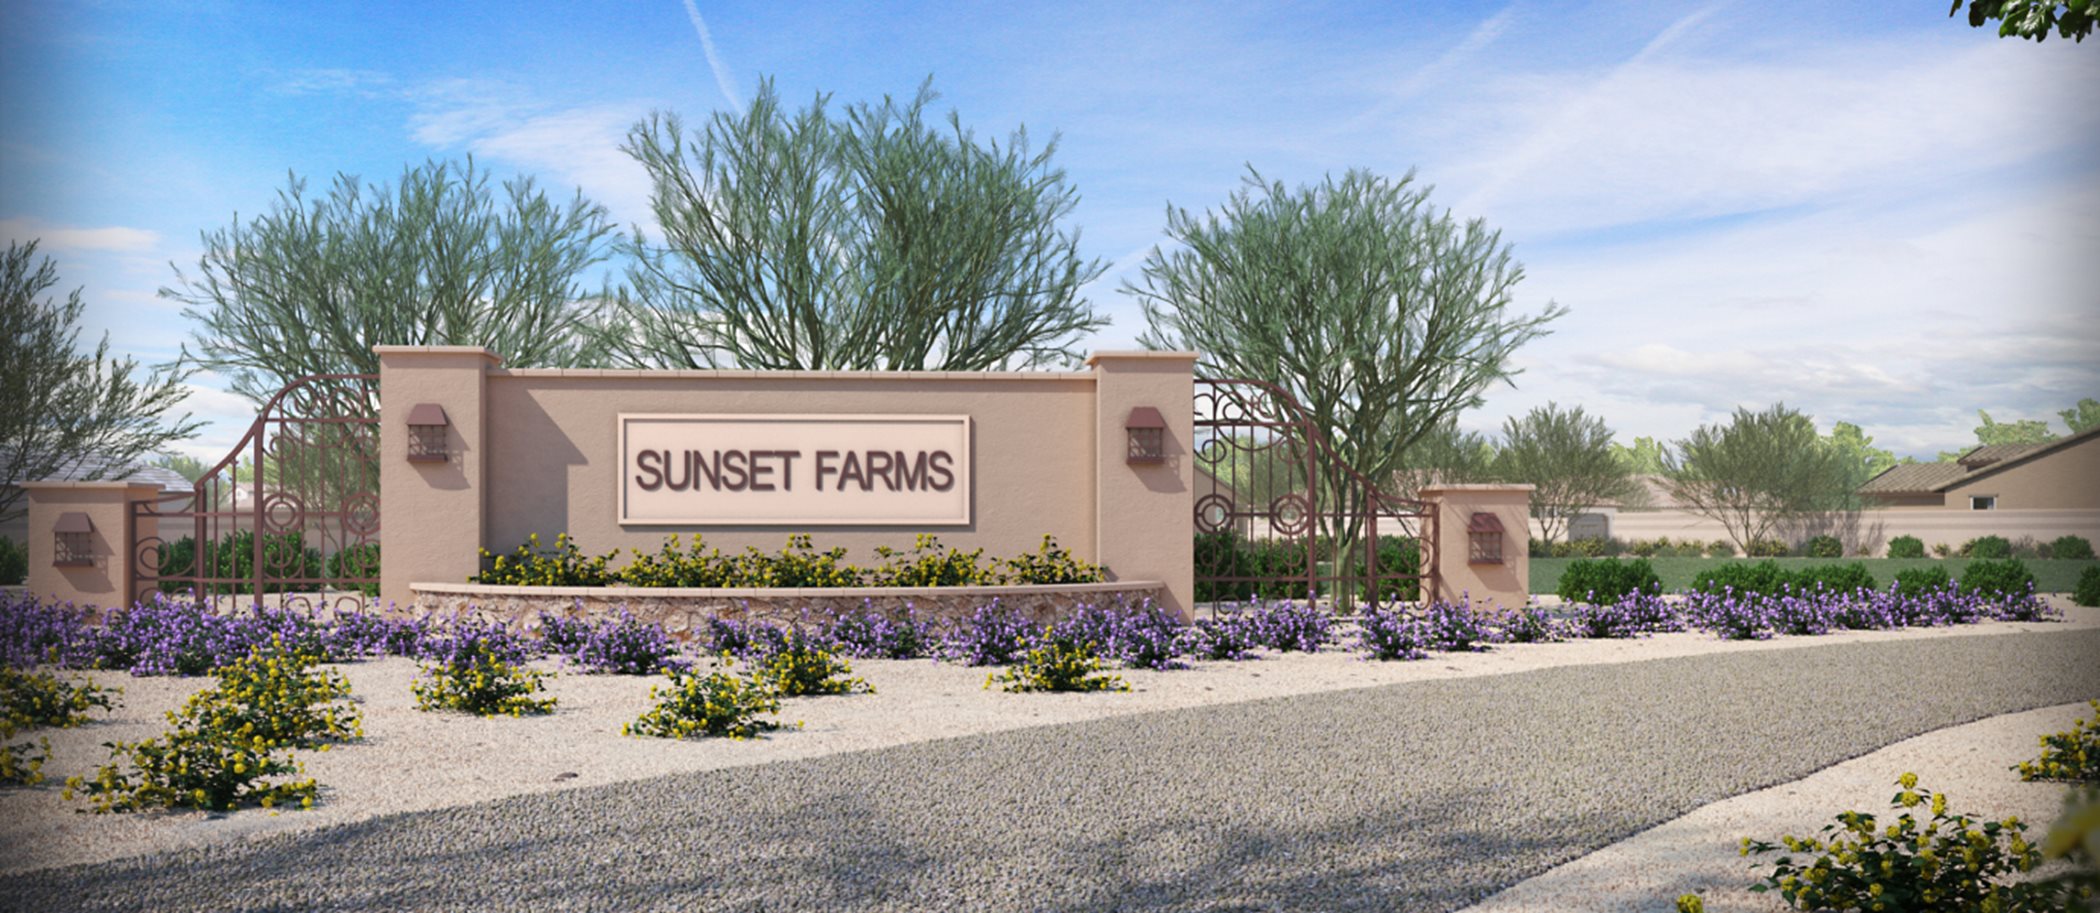 sunset farms welcome sign